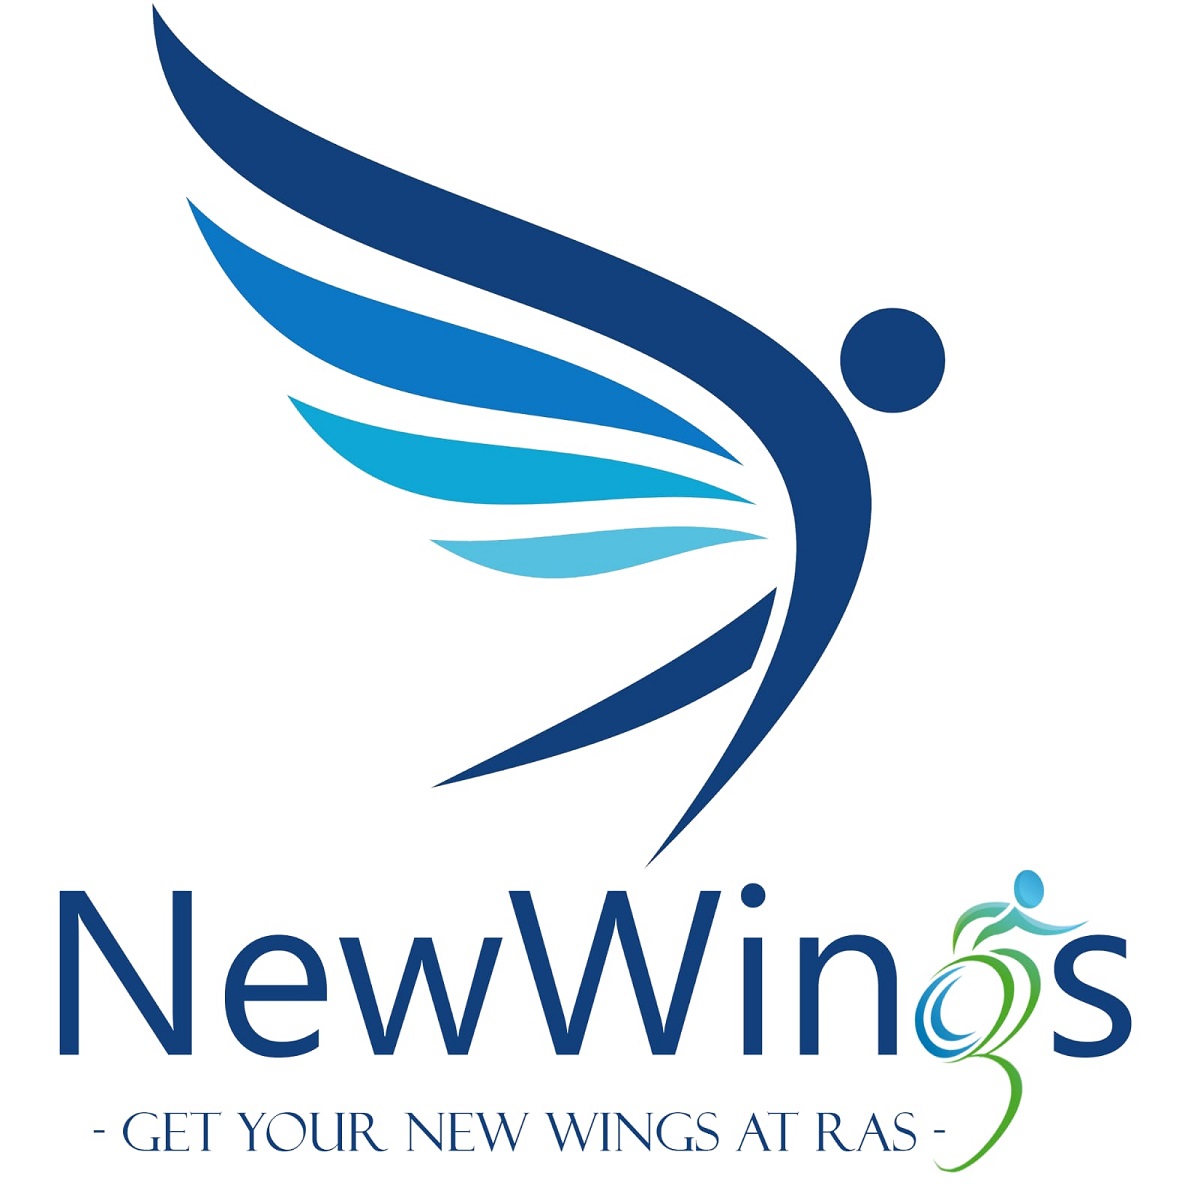 logo NewWings. Get your new wings at ras